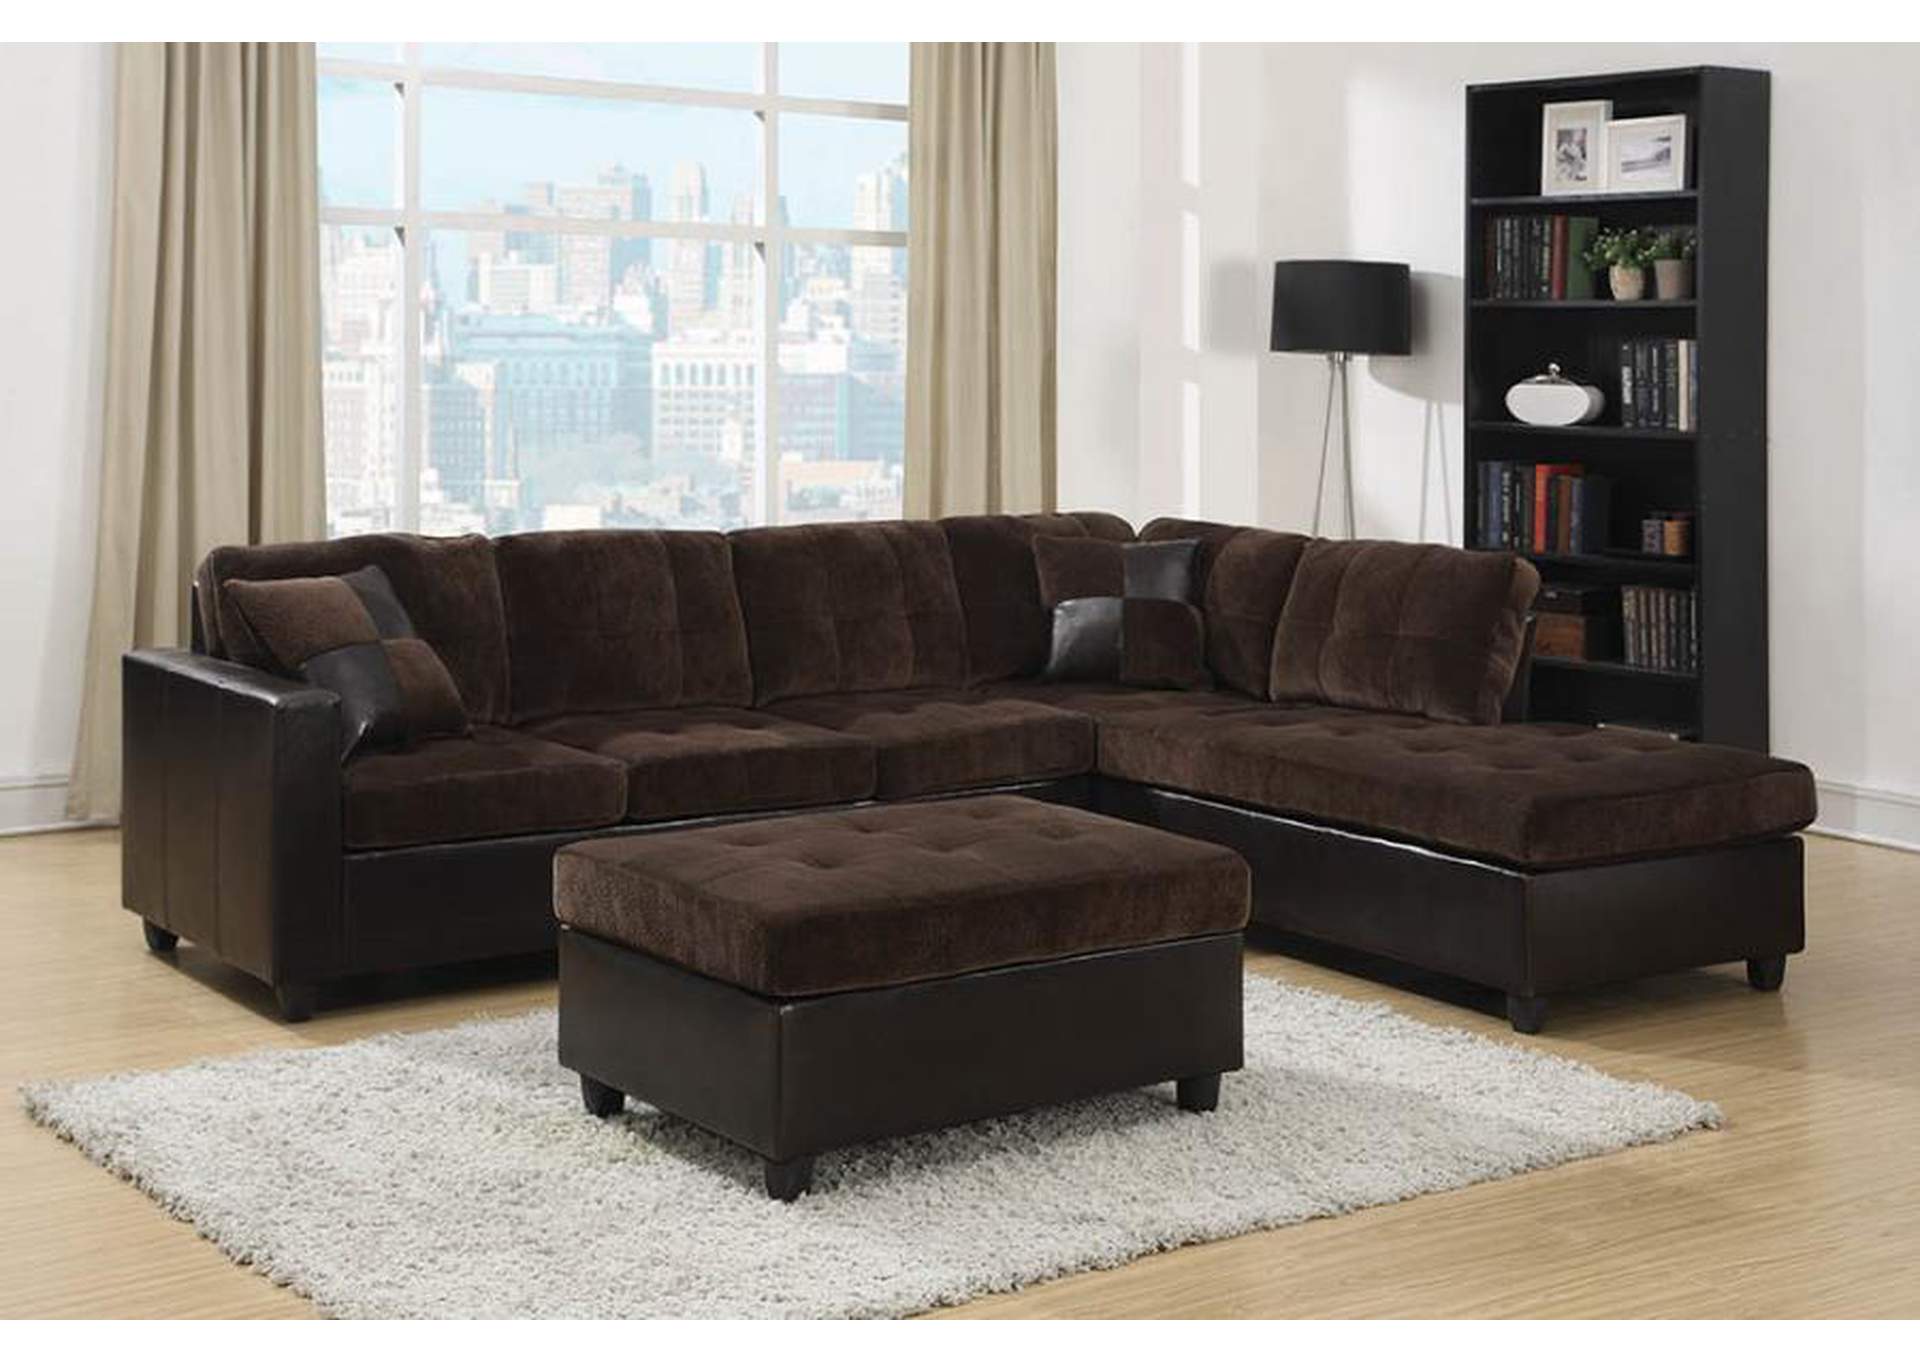 Mallory Tufted Upholstered Sectional Dark Chocolate,Coaster Furniture